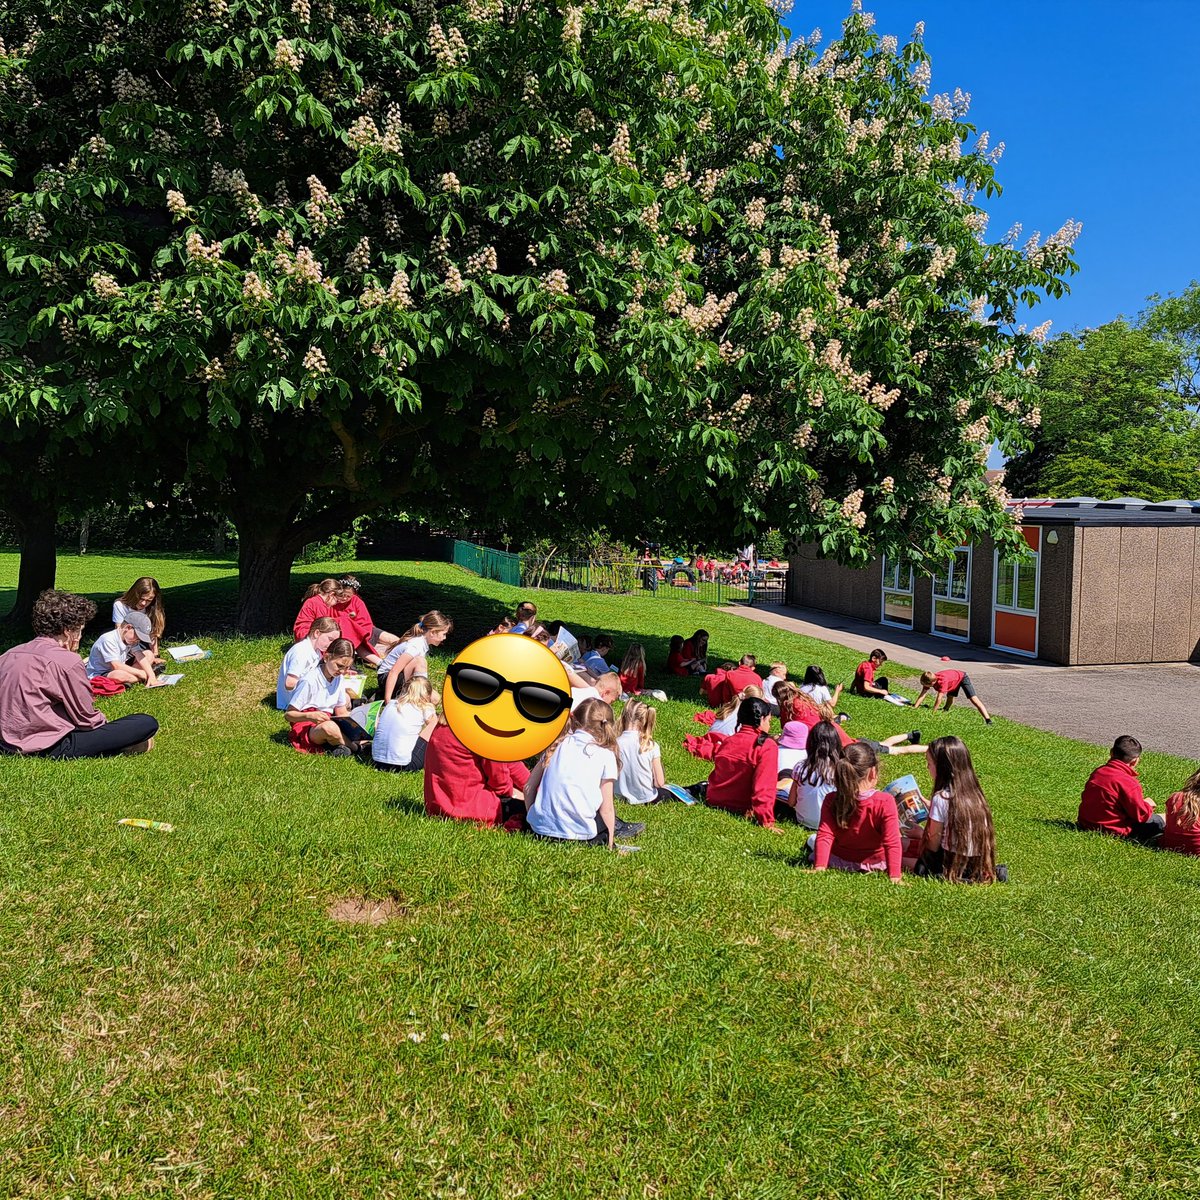 Year 6s and 2s enjoying our buddy reading out in the sunshine today. #welovereading #bookaday